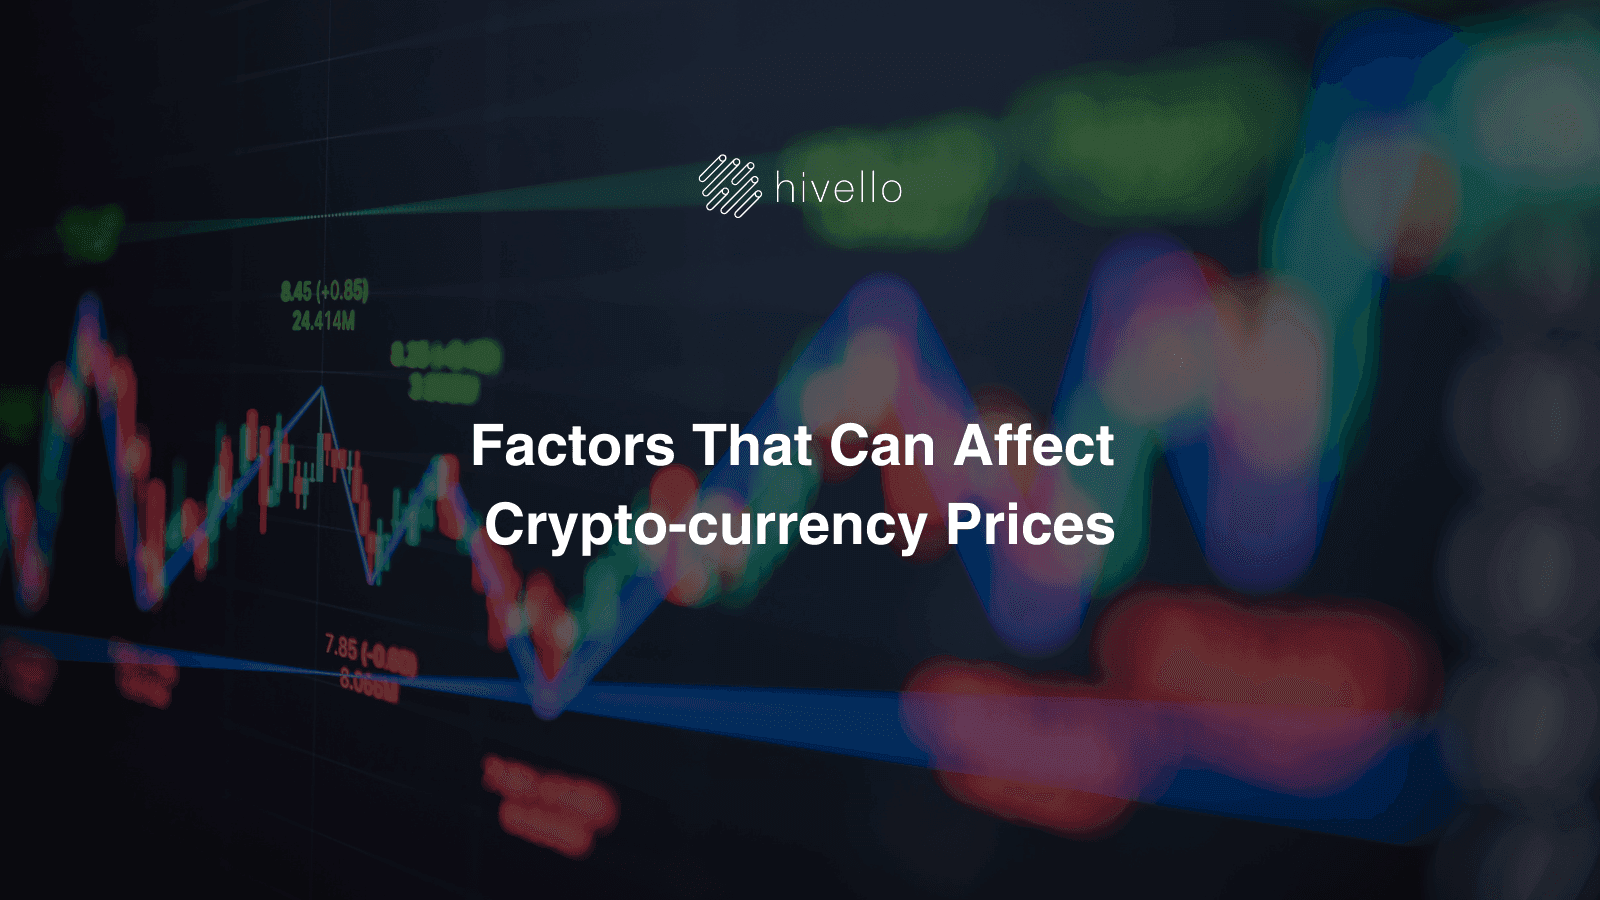 Factors That Can Affect Crypto-currency Prices